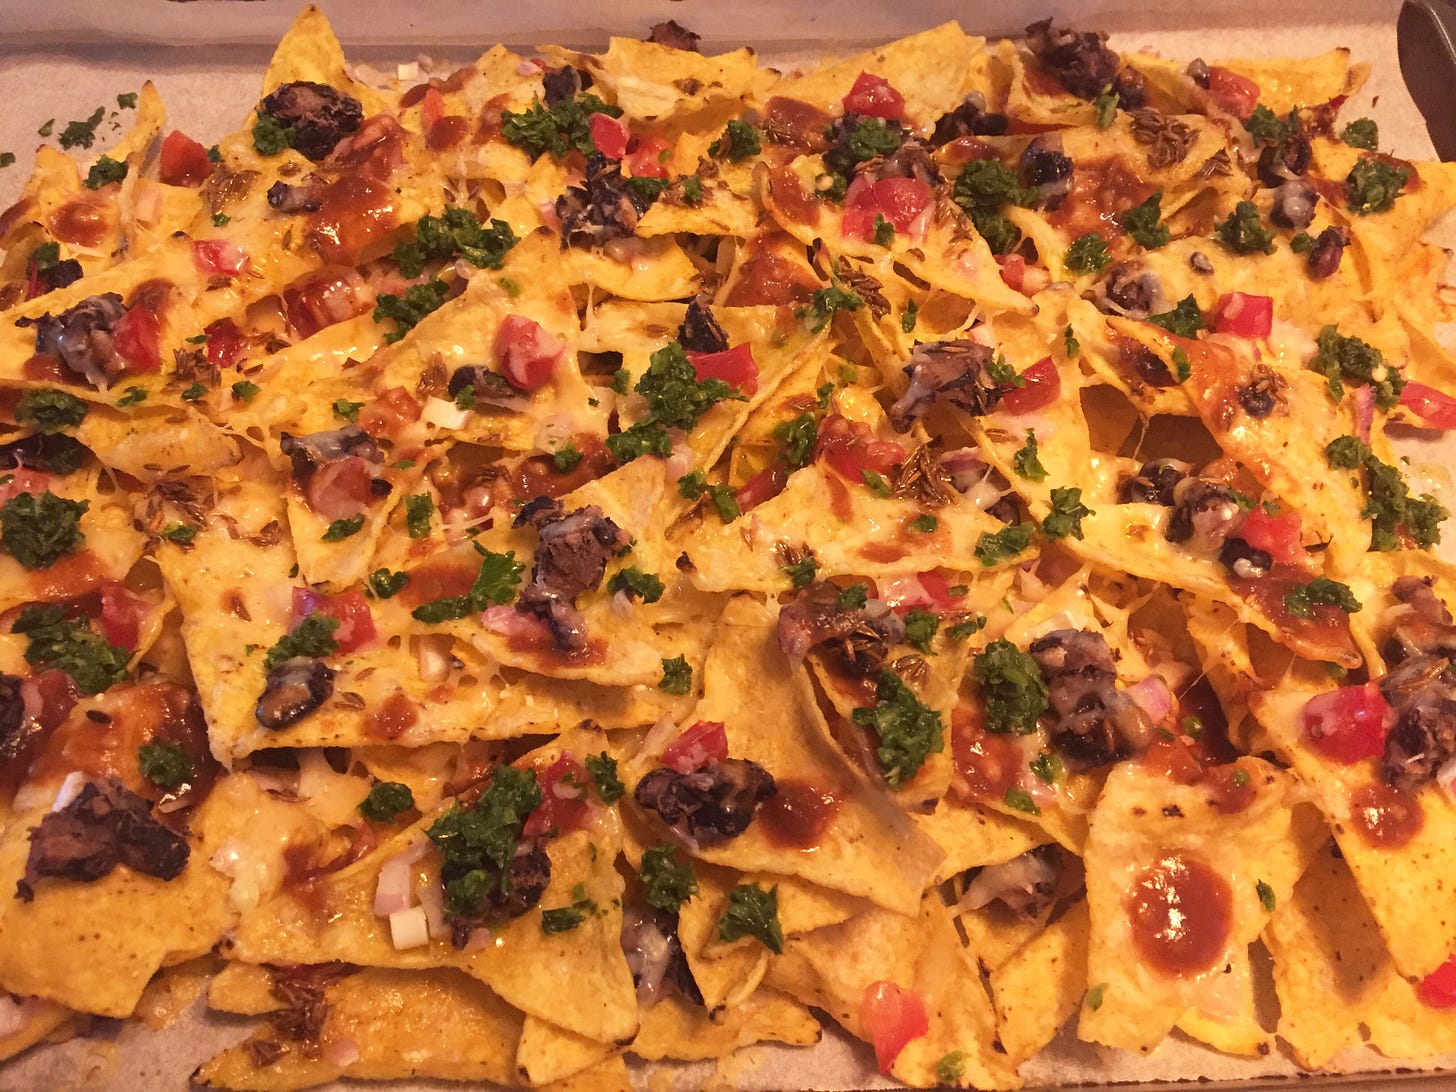 Nachos made with yellow corn tortilla chips, white cheddar, black beans, red onion, tomato, and cilantro chutney and tamarind sauce drizzled overtop.